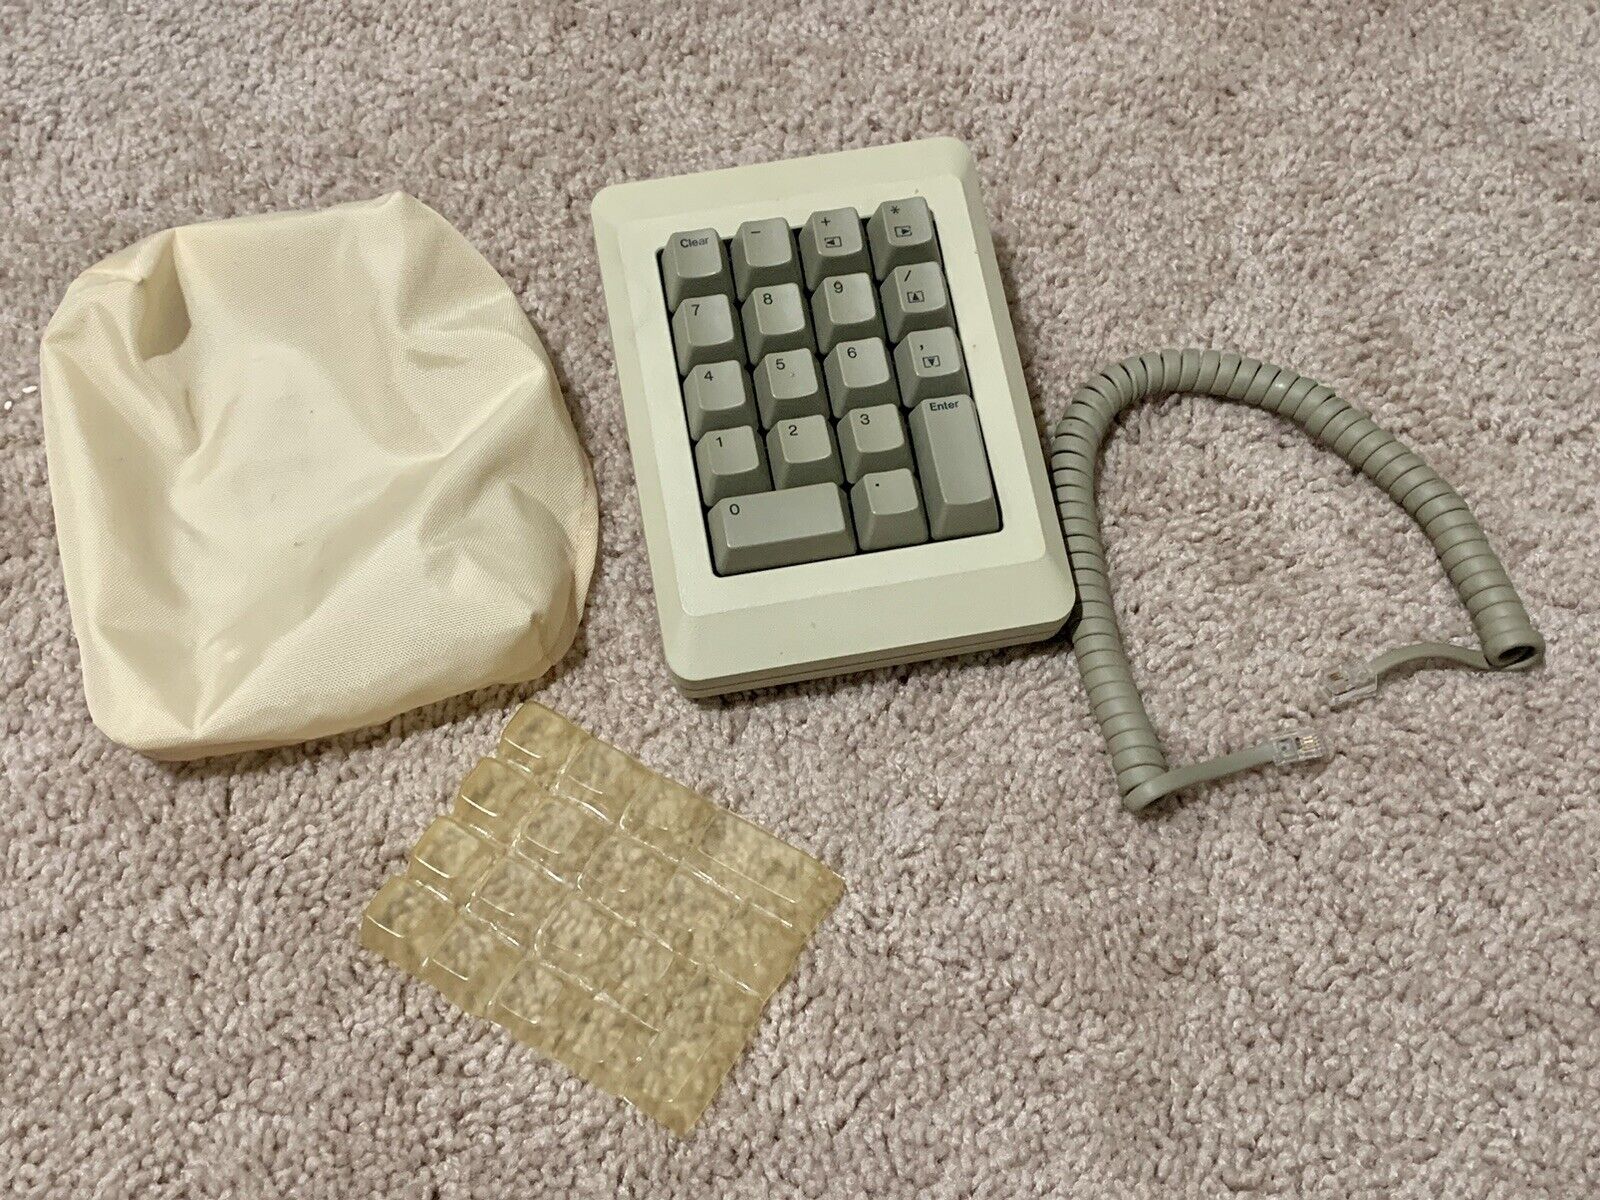 1984 Macintosh M0001 Numeric Keypad M0120 Cable Tested Works Dust Cover